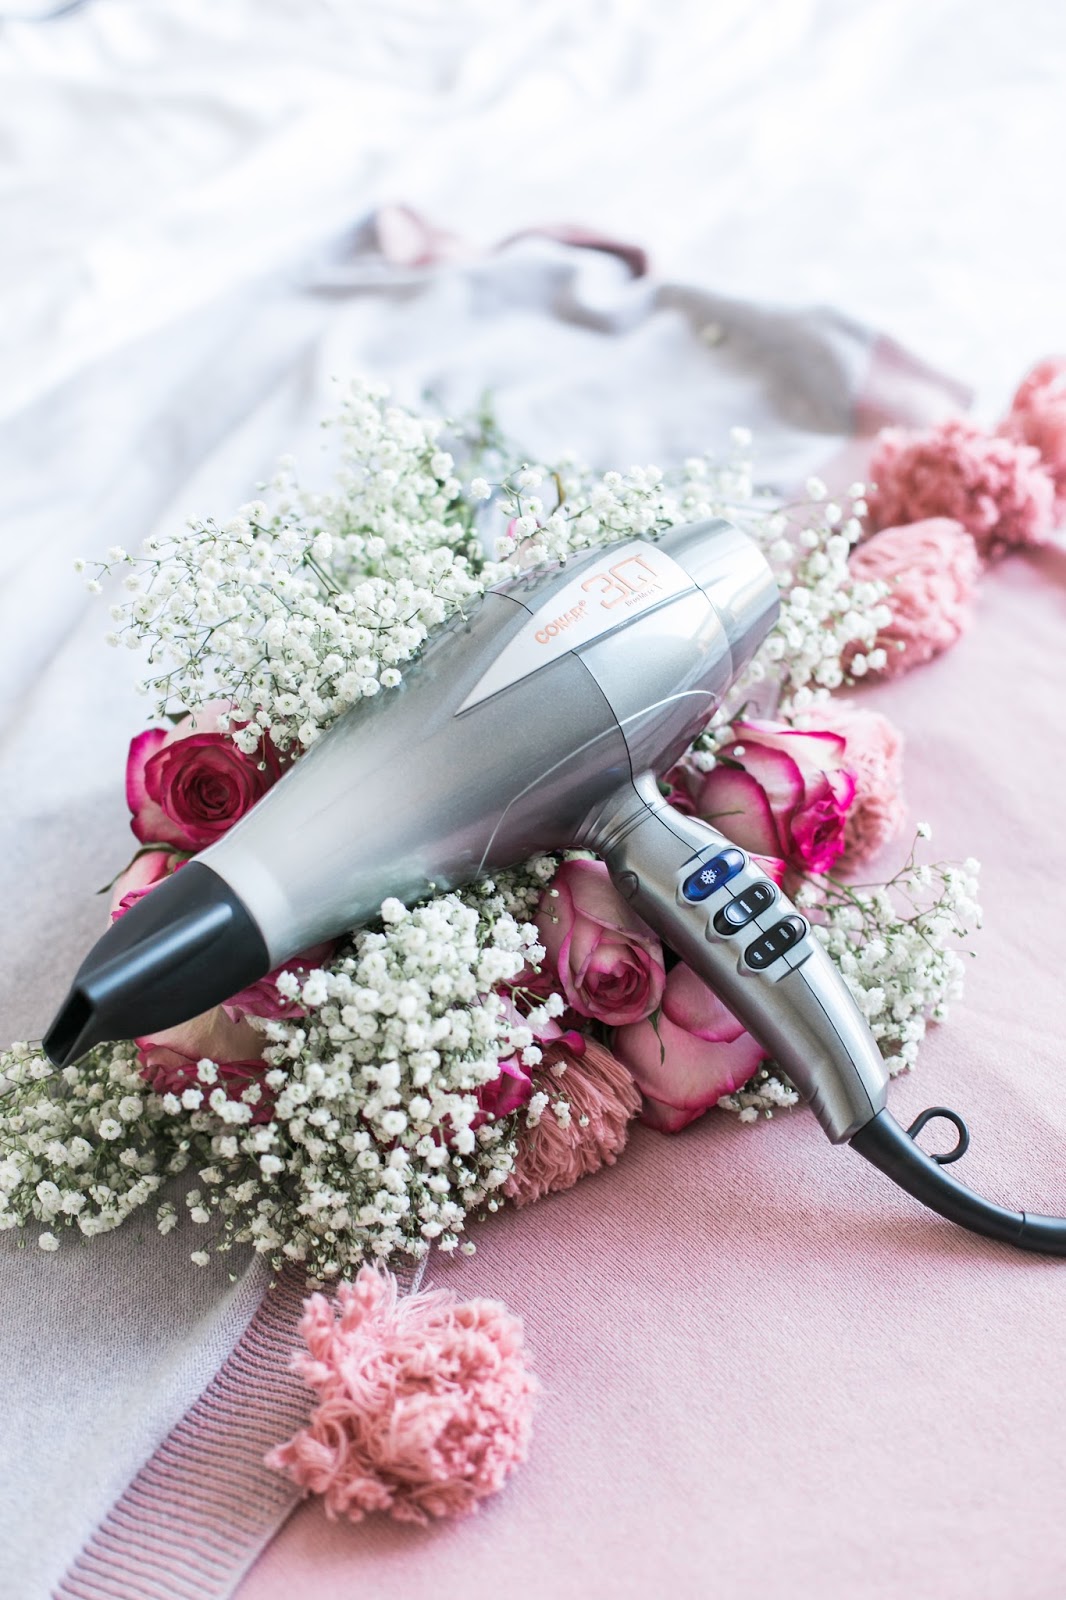 Bijuleni - 7 Mistakes you are making while blow-drying your hair, plus Infiniti Pro by Conair 3Q Styling Tool review